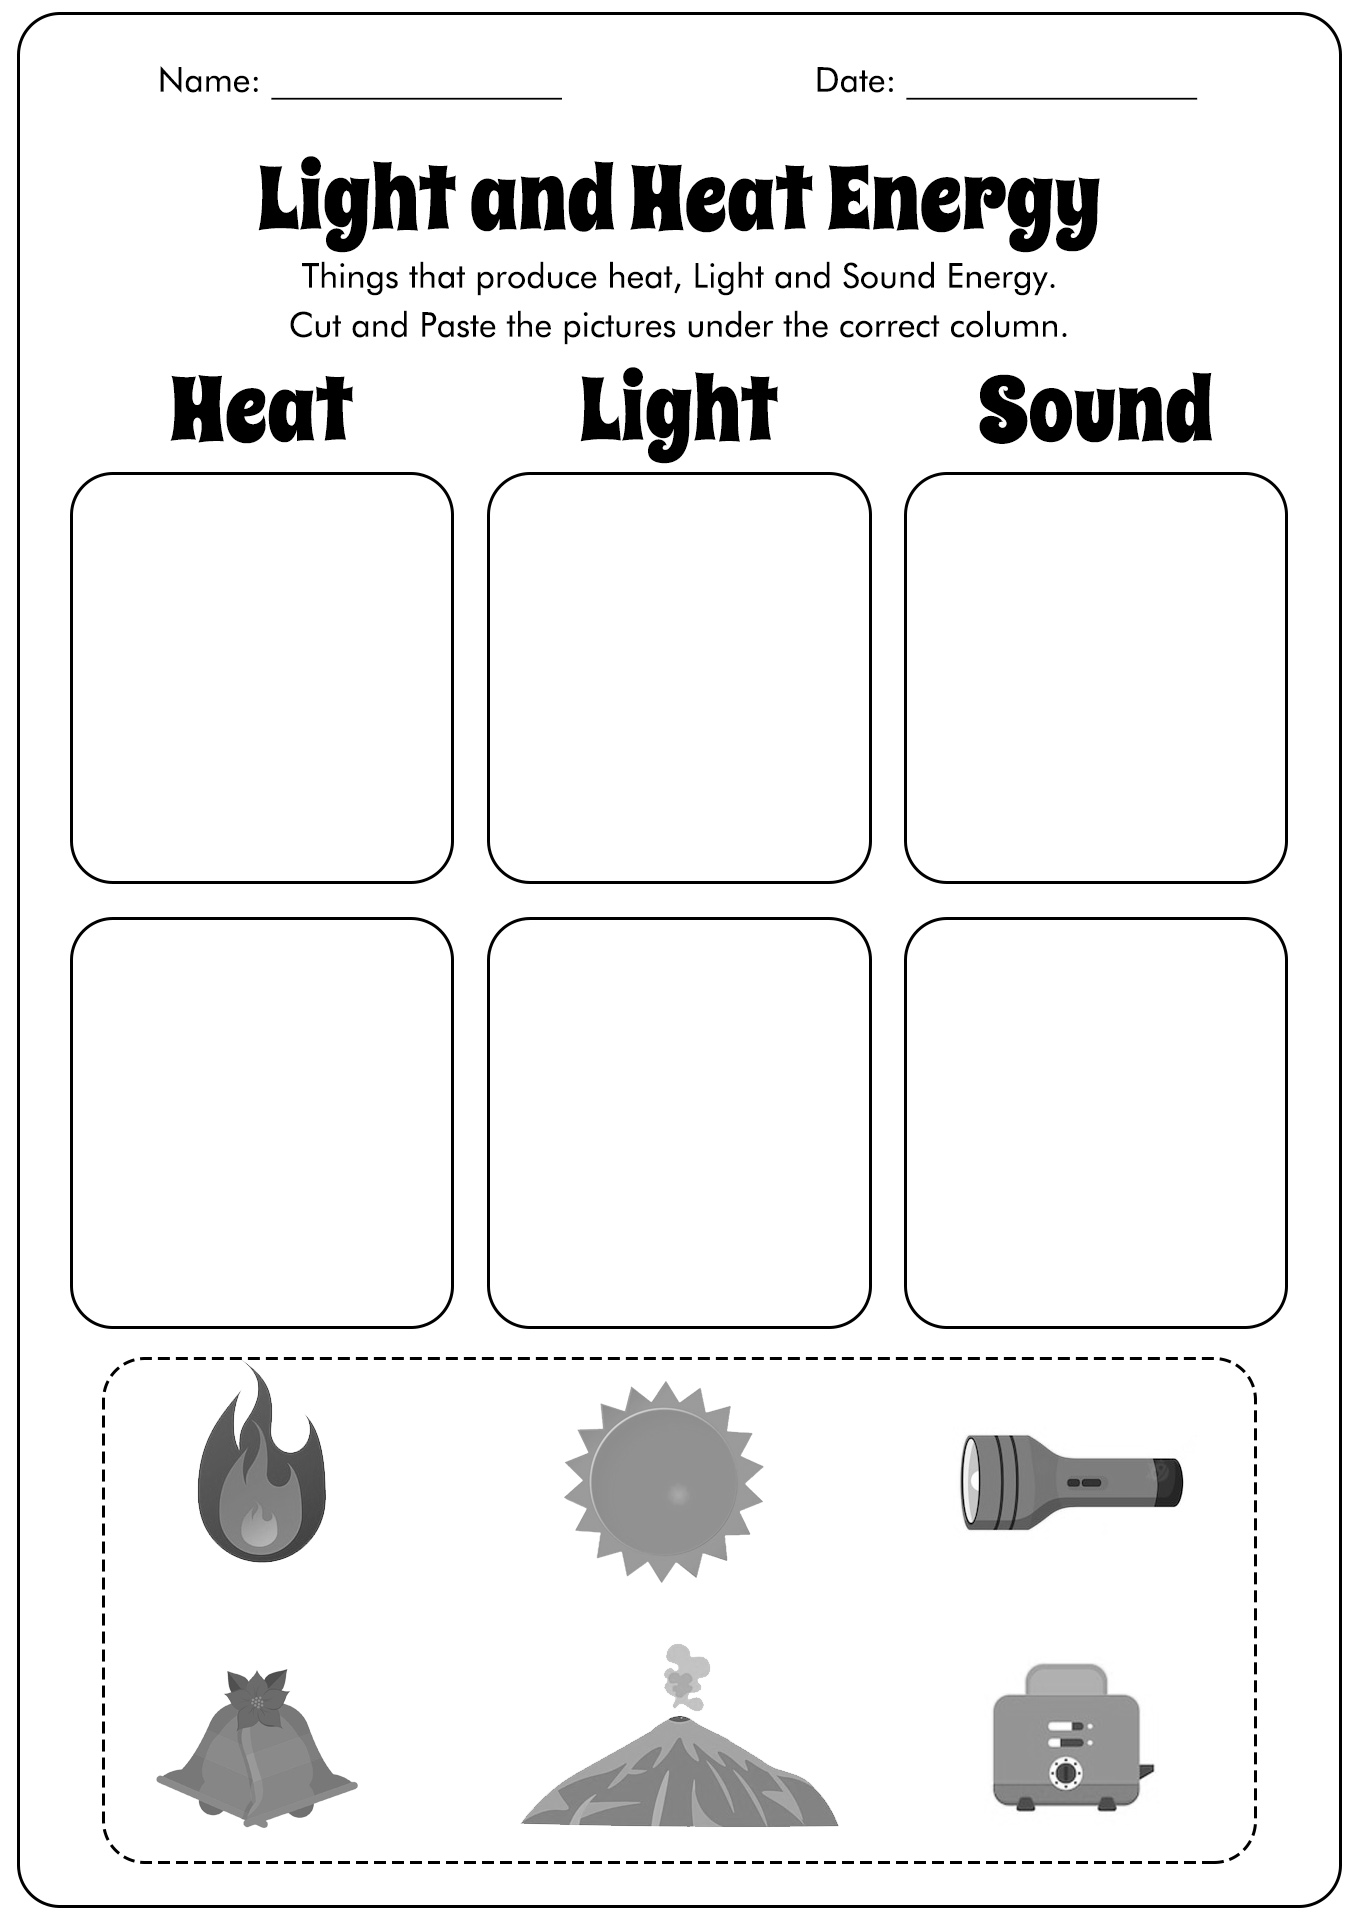 Light and Heat Energy Worksheets Image